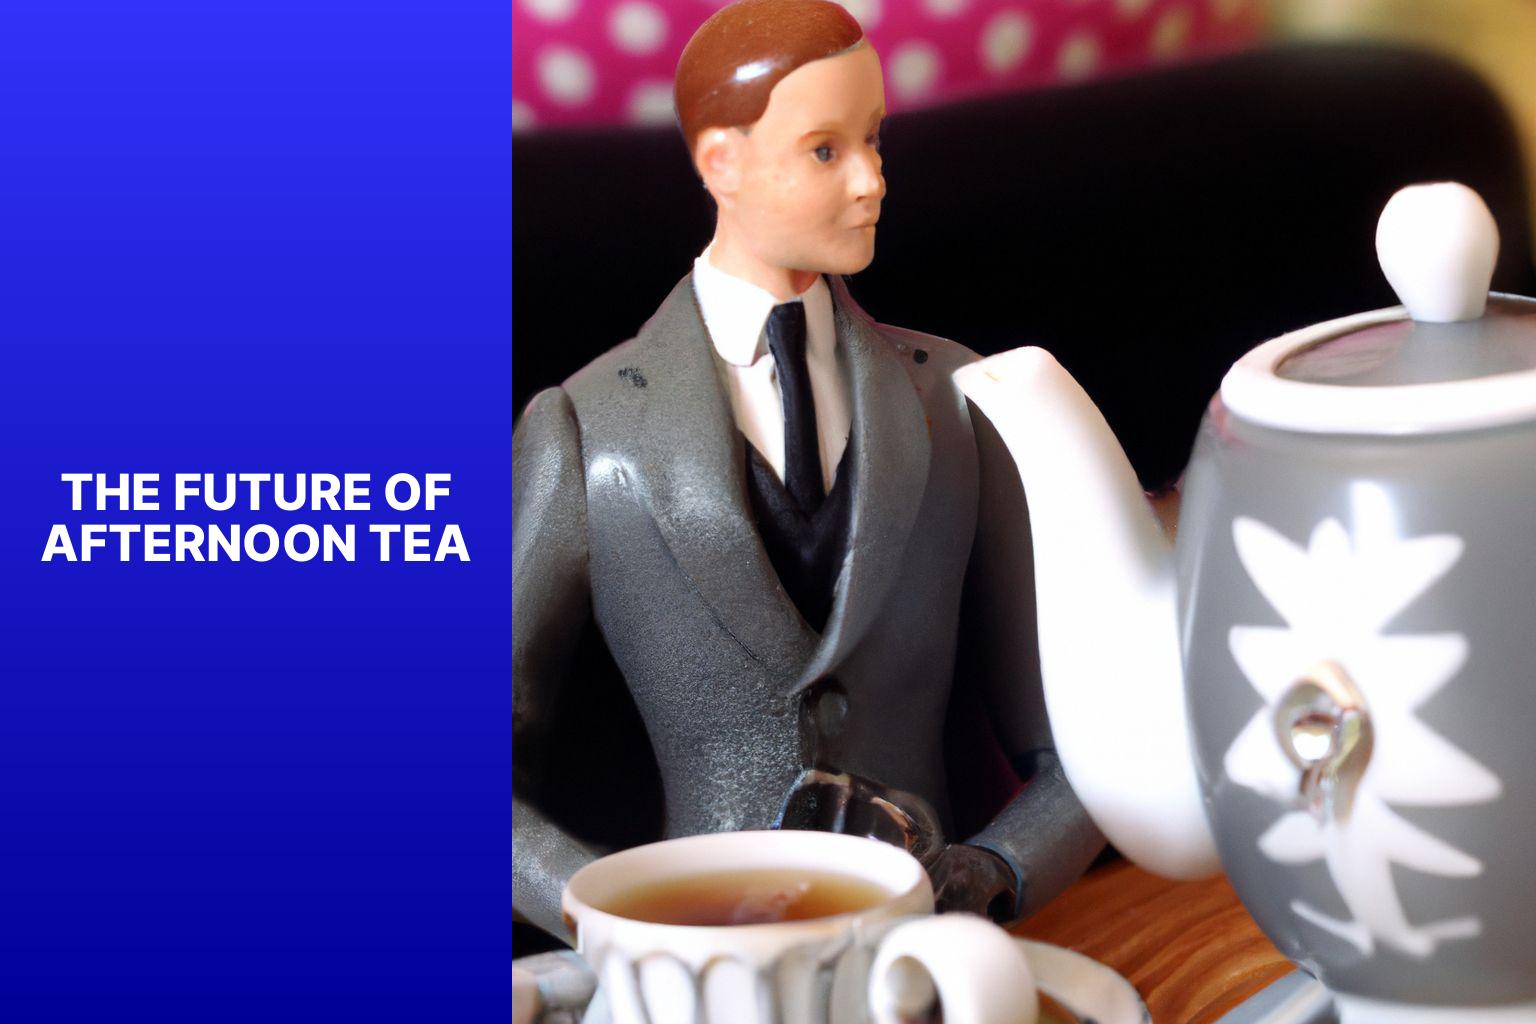 The Future of Afternoon Tea - Reviving the Gentleman